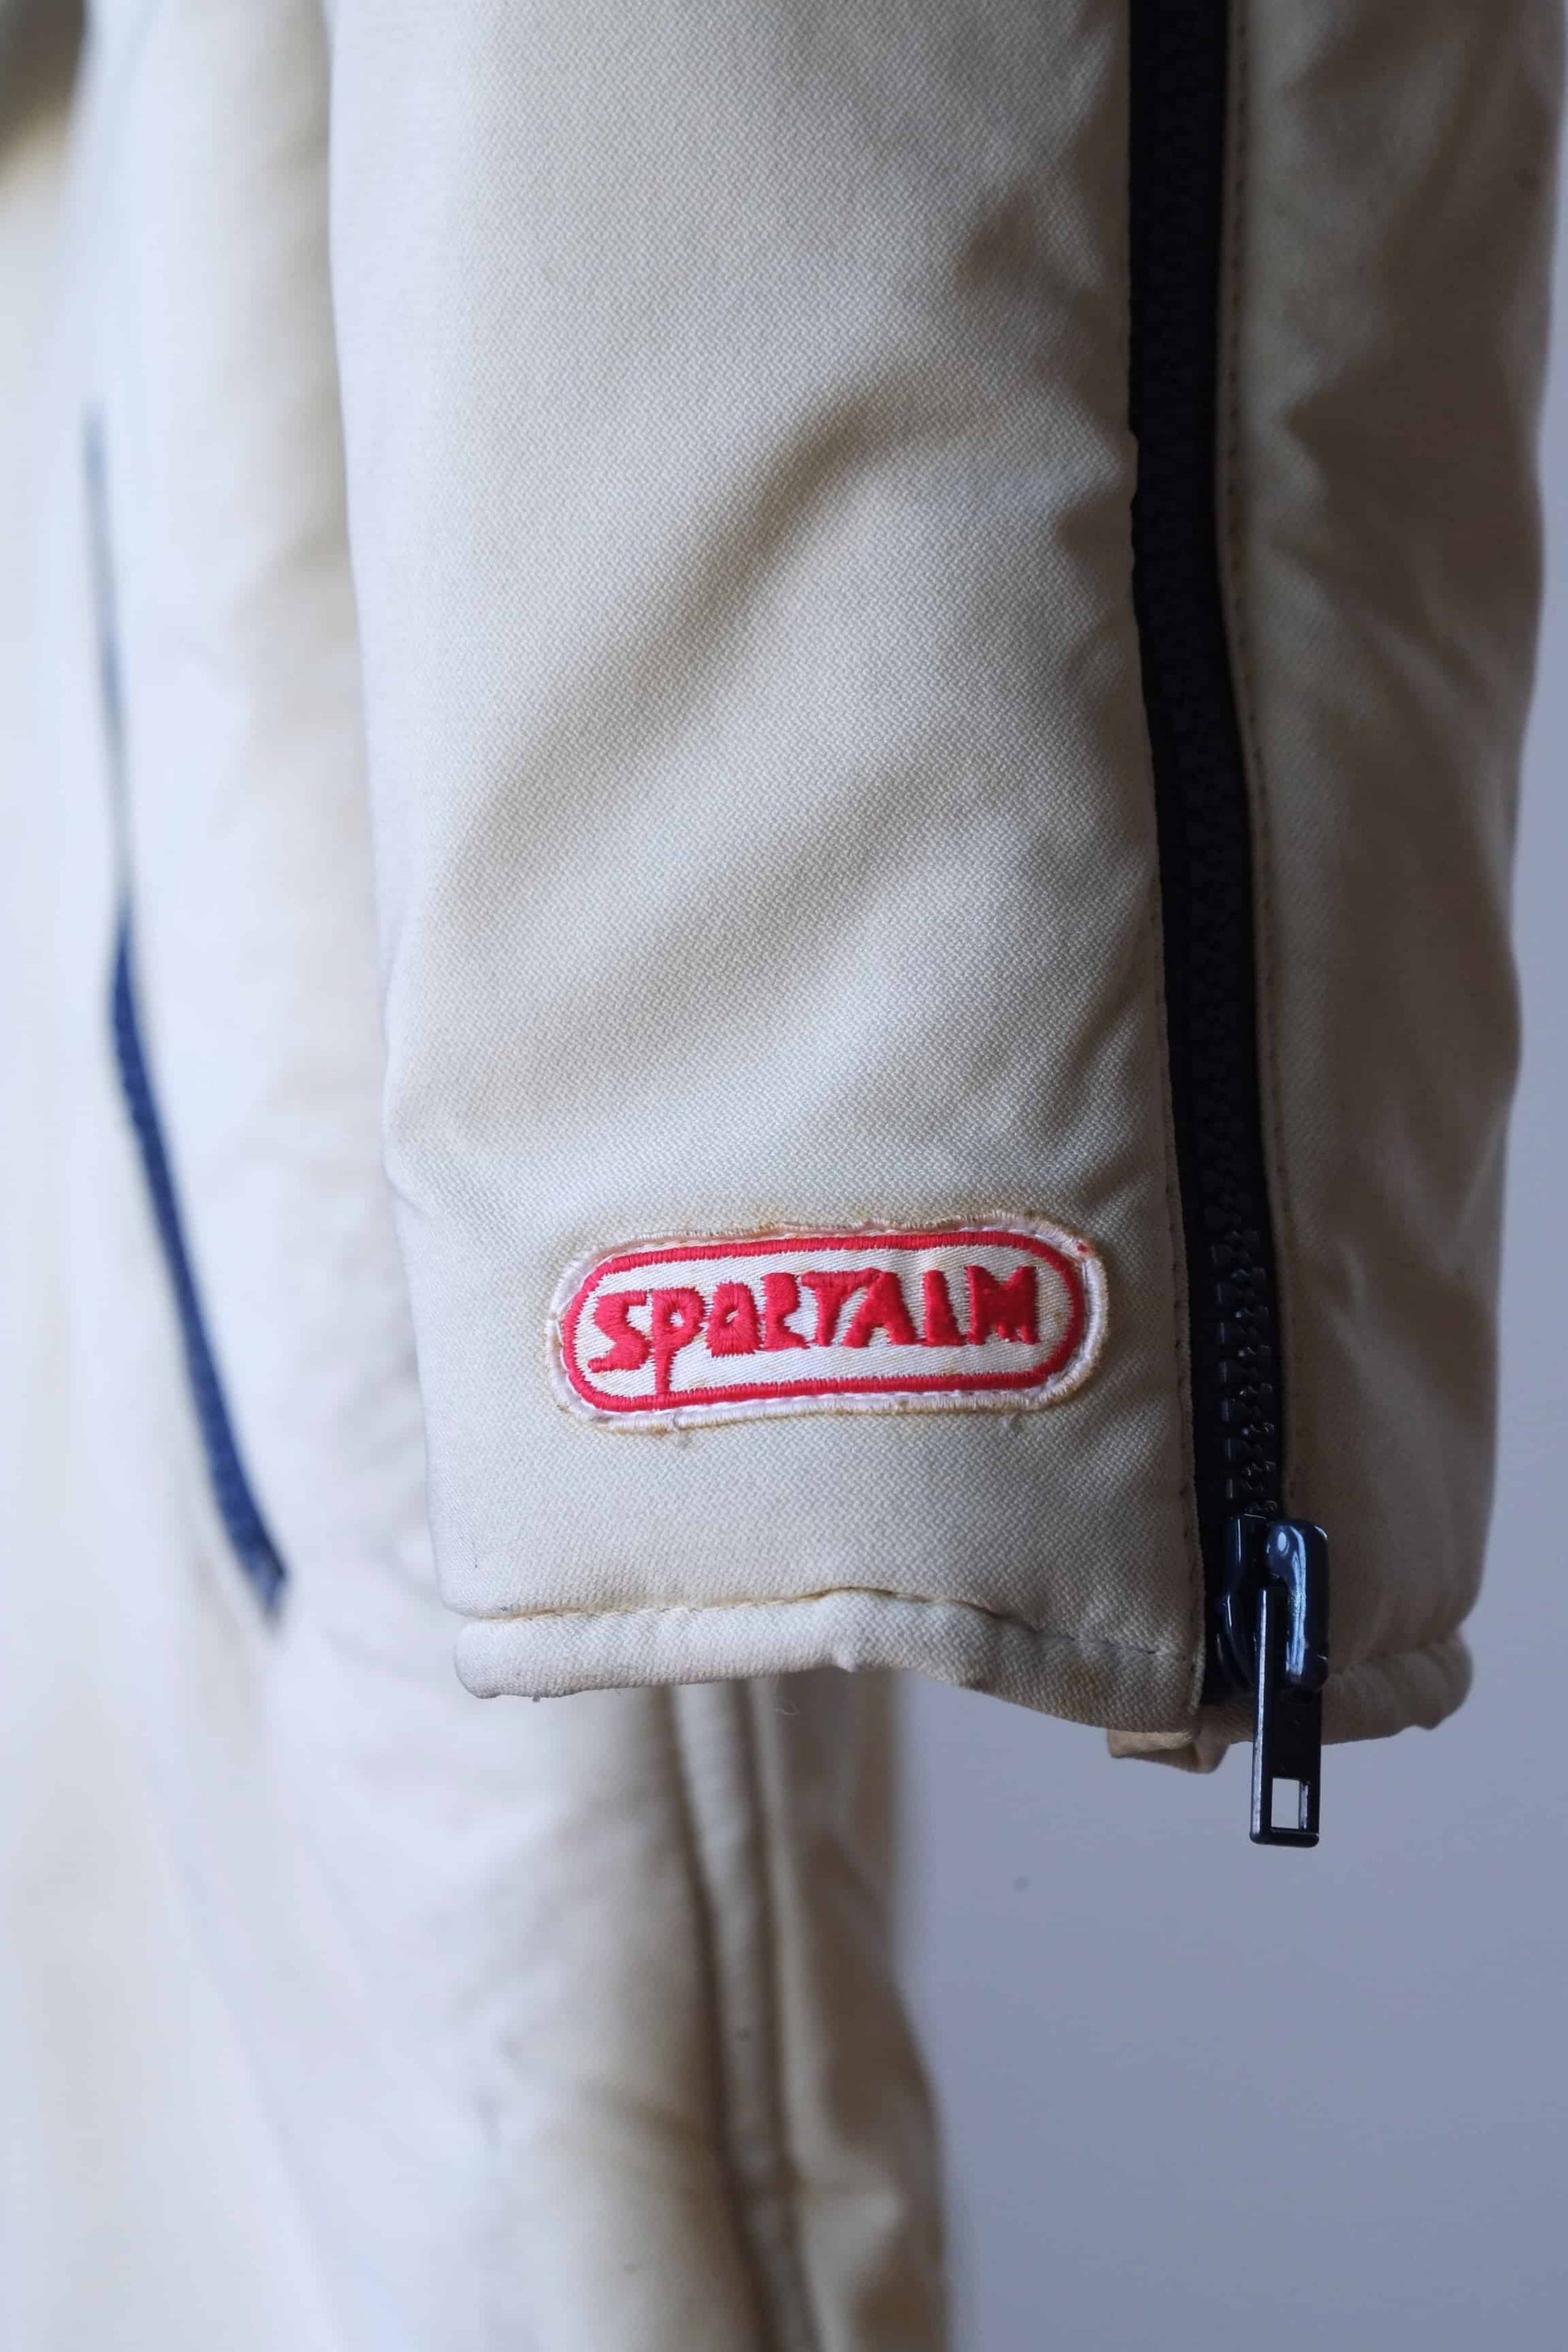 Close up view of the SPORTALM logo on the sleeve of a Vintage 60's Men's Ski Suit